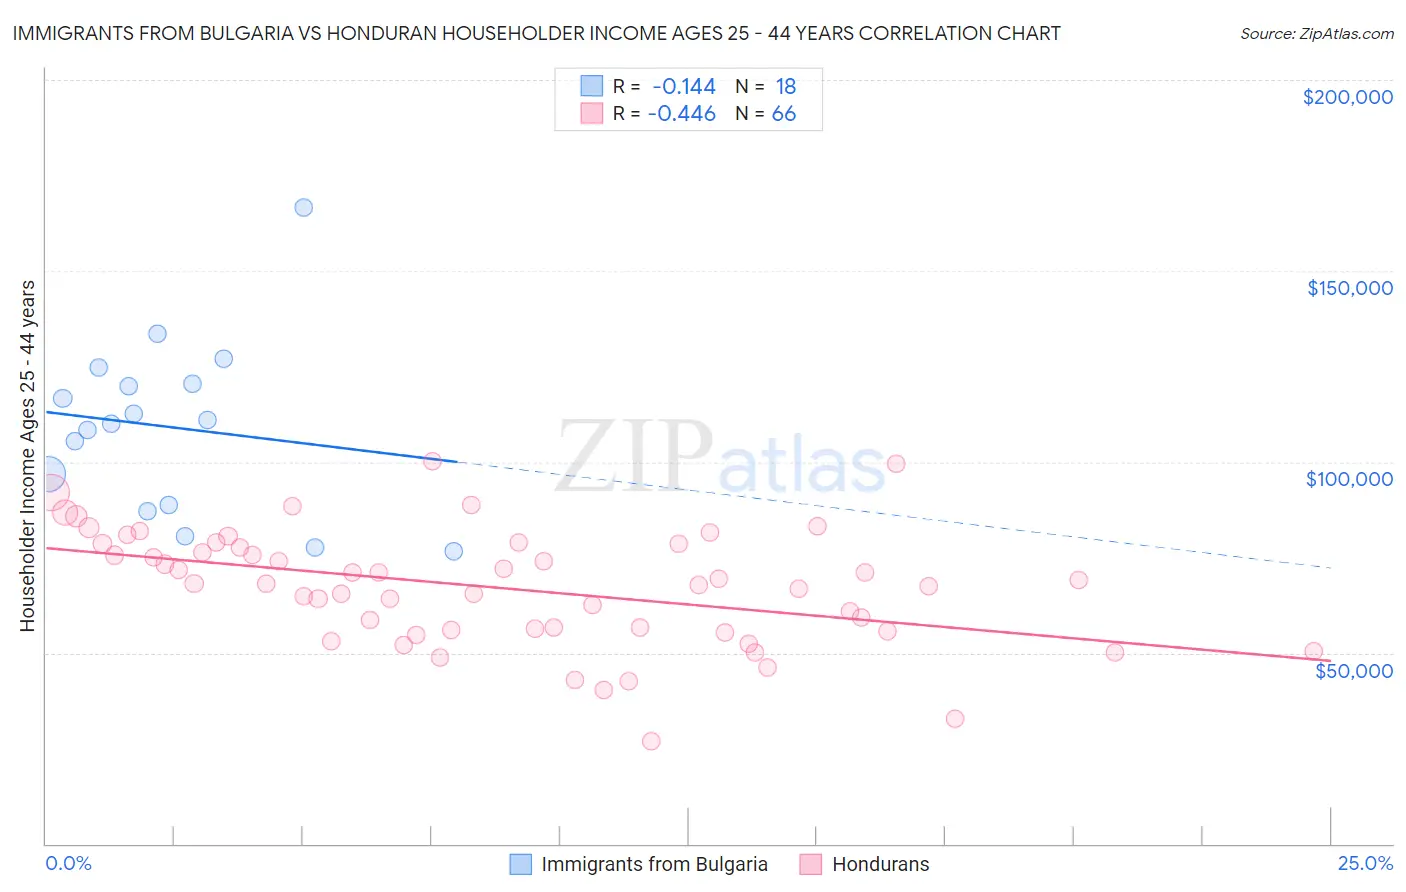 Immigrants from Bulgaria vs Honduran Householder Income Ages 25 - 44 years